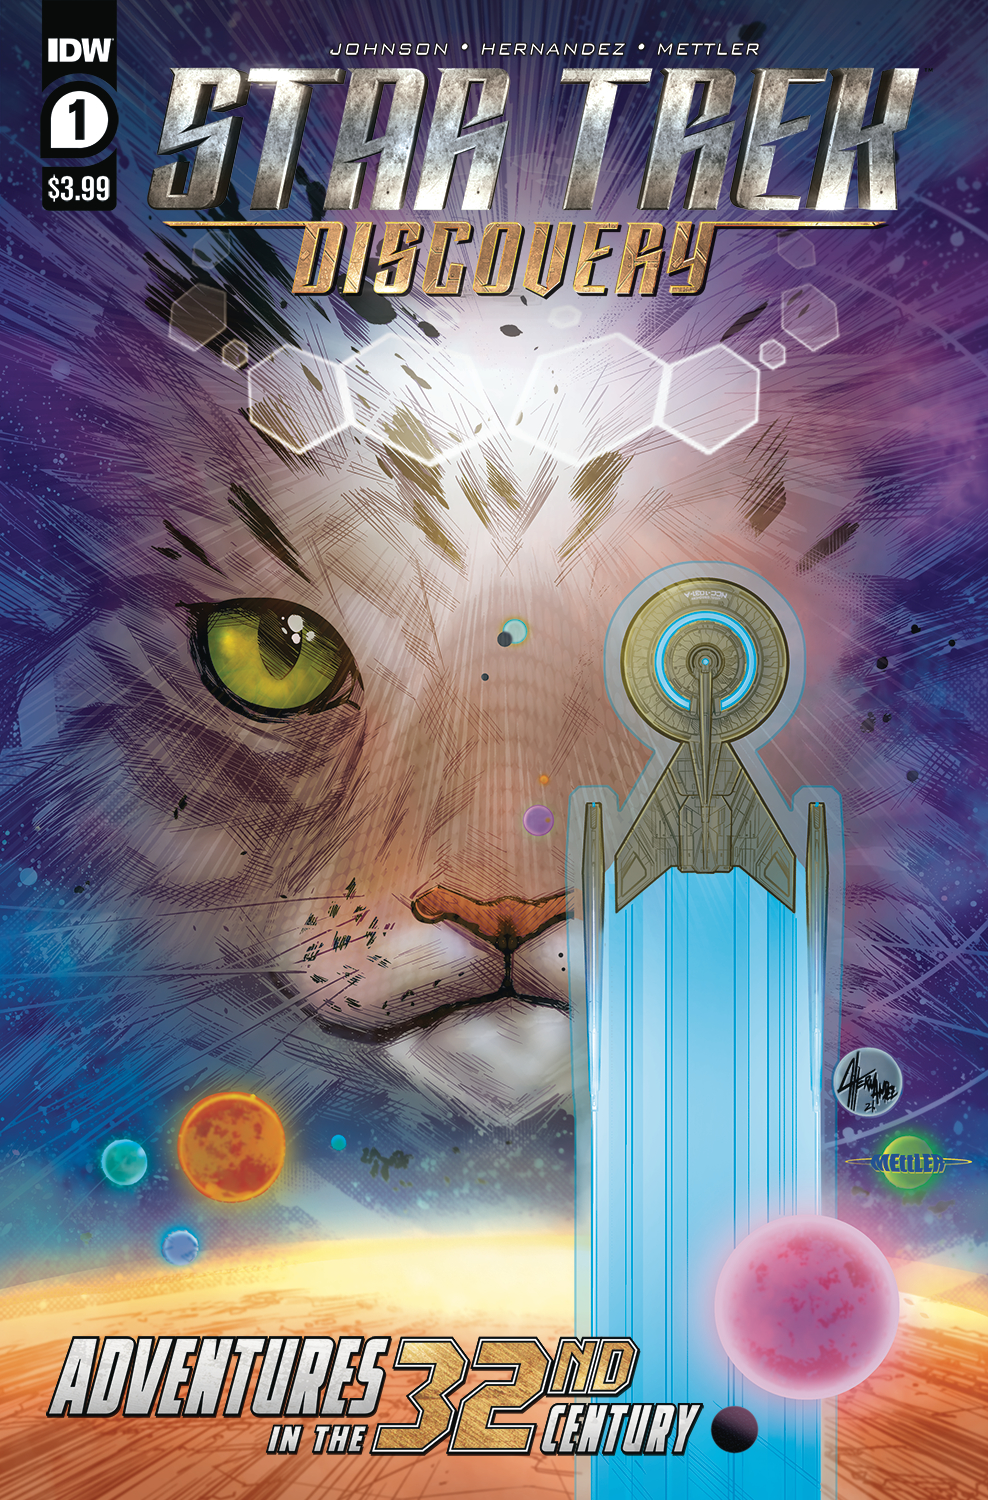 Star Trek Discovery Adventure In 32nd Century #1 Cover A Hernandez (Of 4)